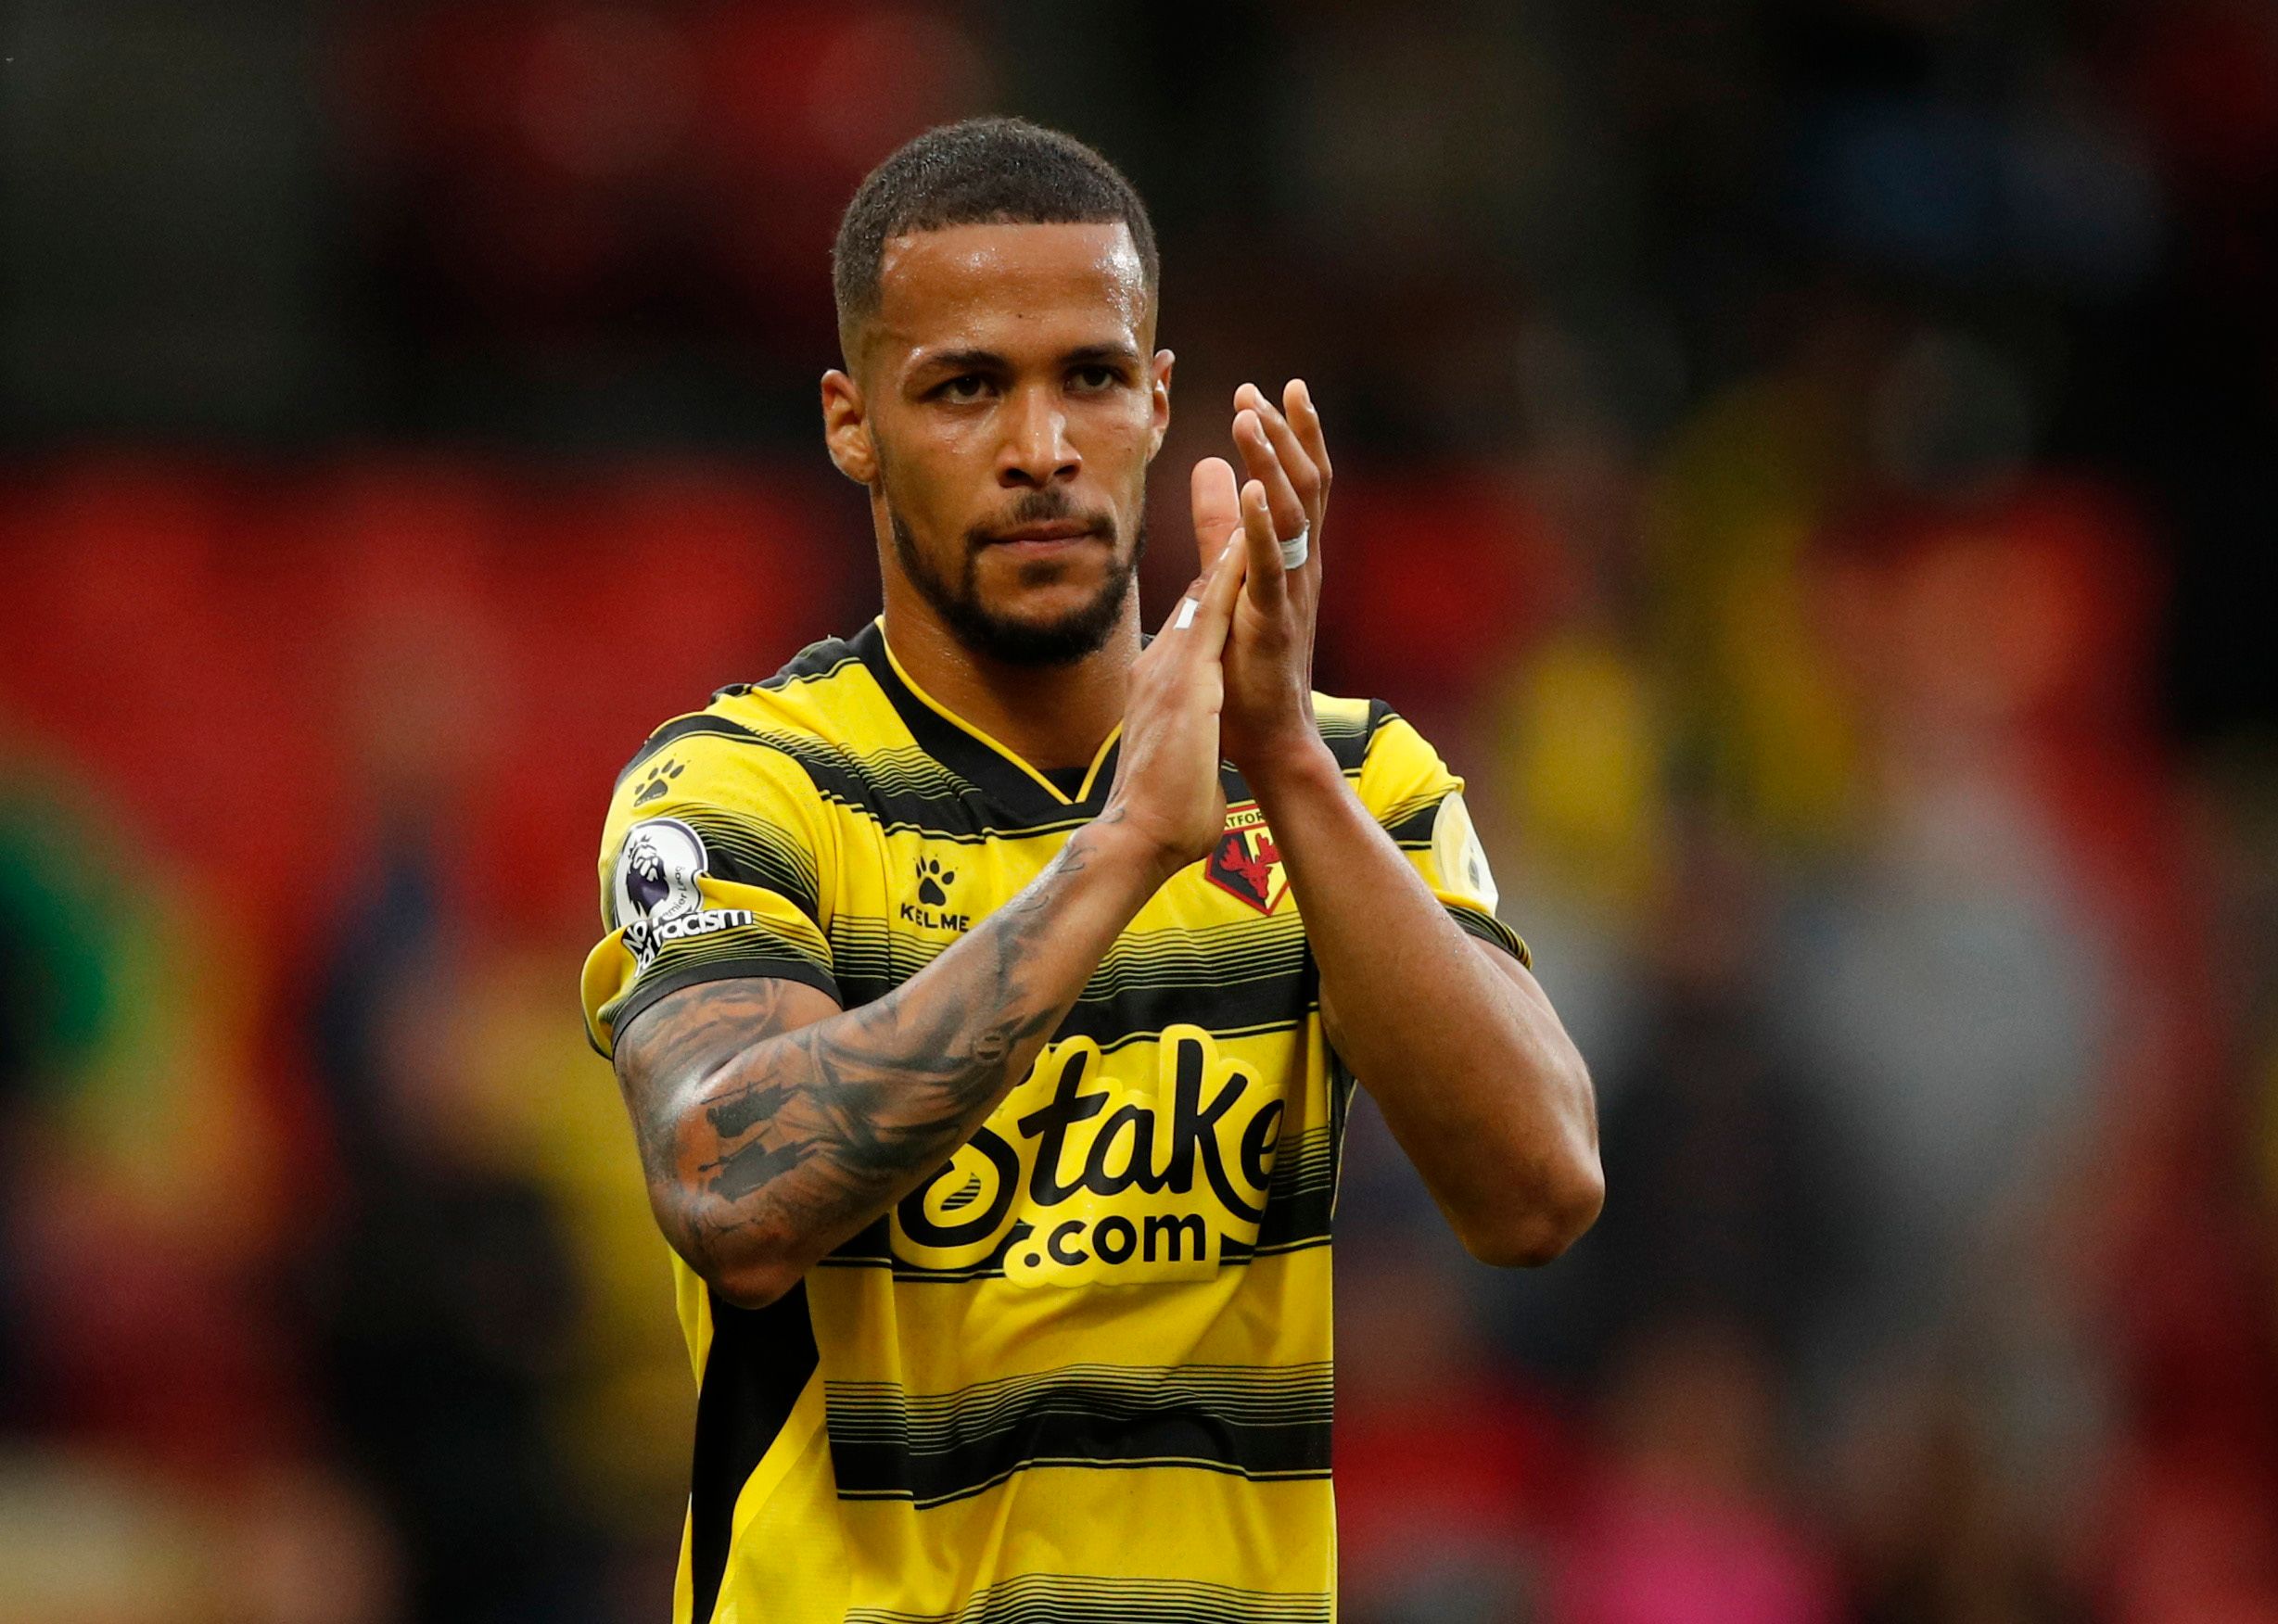 Soccer Football - Premier League - Watford v Newcastle United - Vicarage Road, Watford, Britain - September 25, 2021 Watford's William Troost-Ekong after the match Action Images via Reuters/Andrew Boyers EDITORIAL USE ONLY. No use with unauthorized audio, video, data, fixture lists, club/league logos or 'live' services. Online in-match use limited to 75 images, no video emulation. No use in betting, games or single club /league/player publications.  Please contact your account representative for